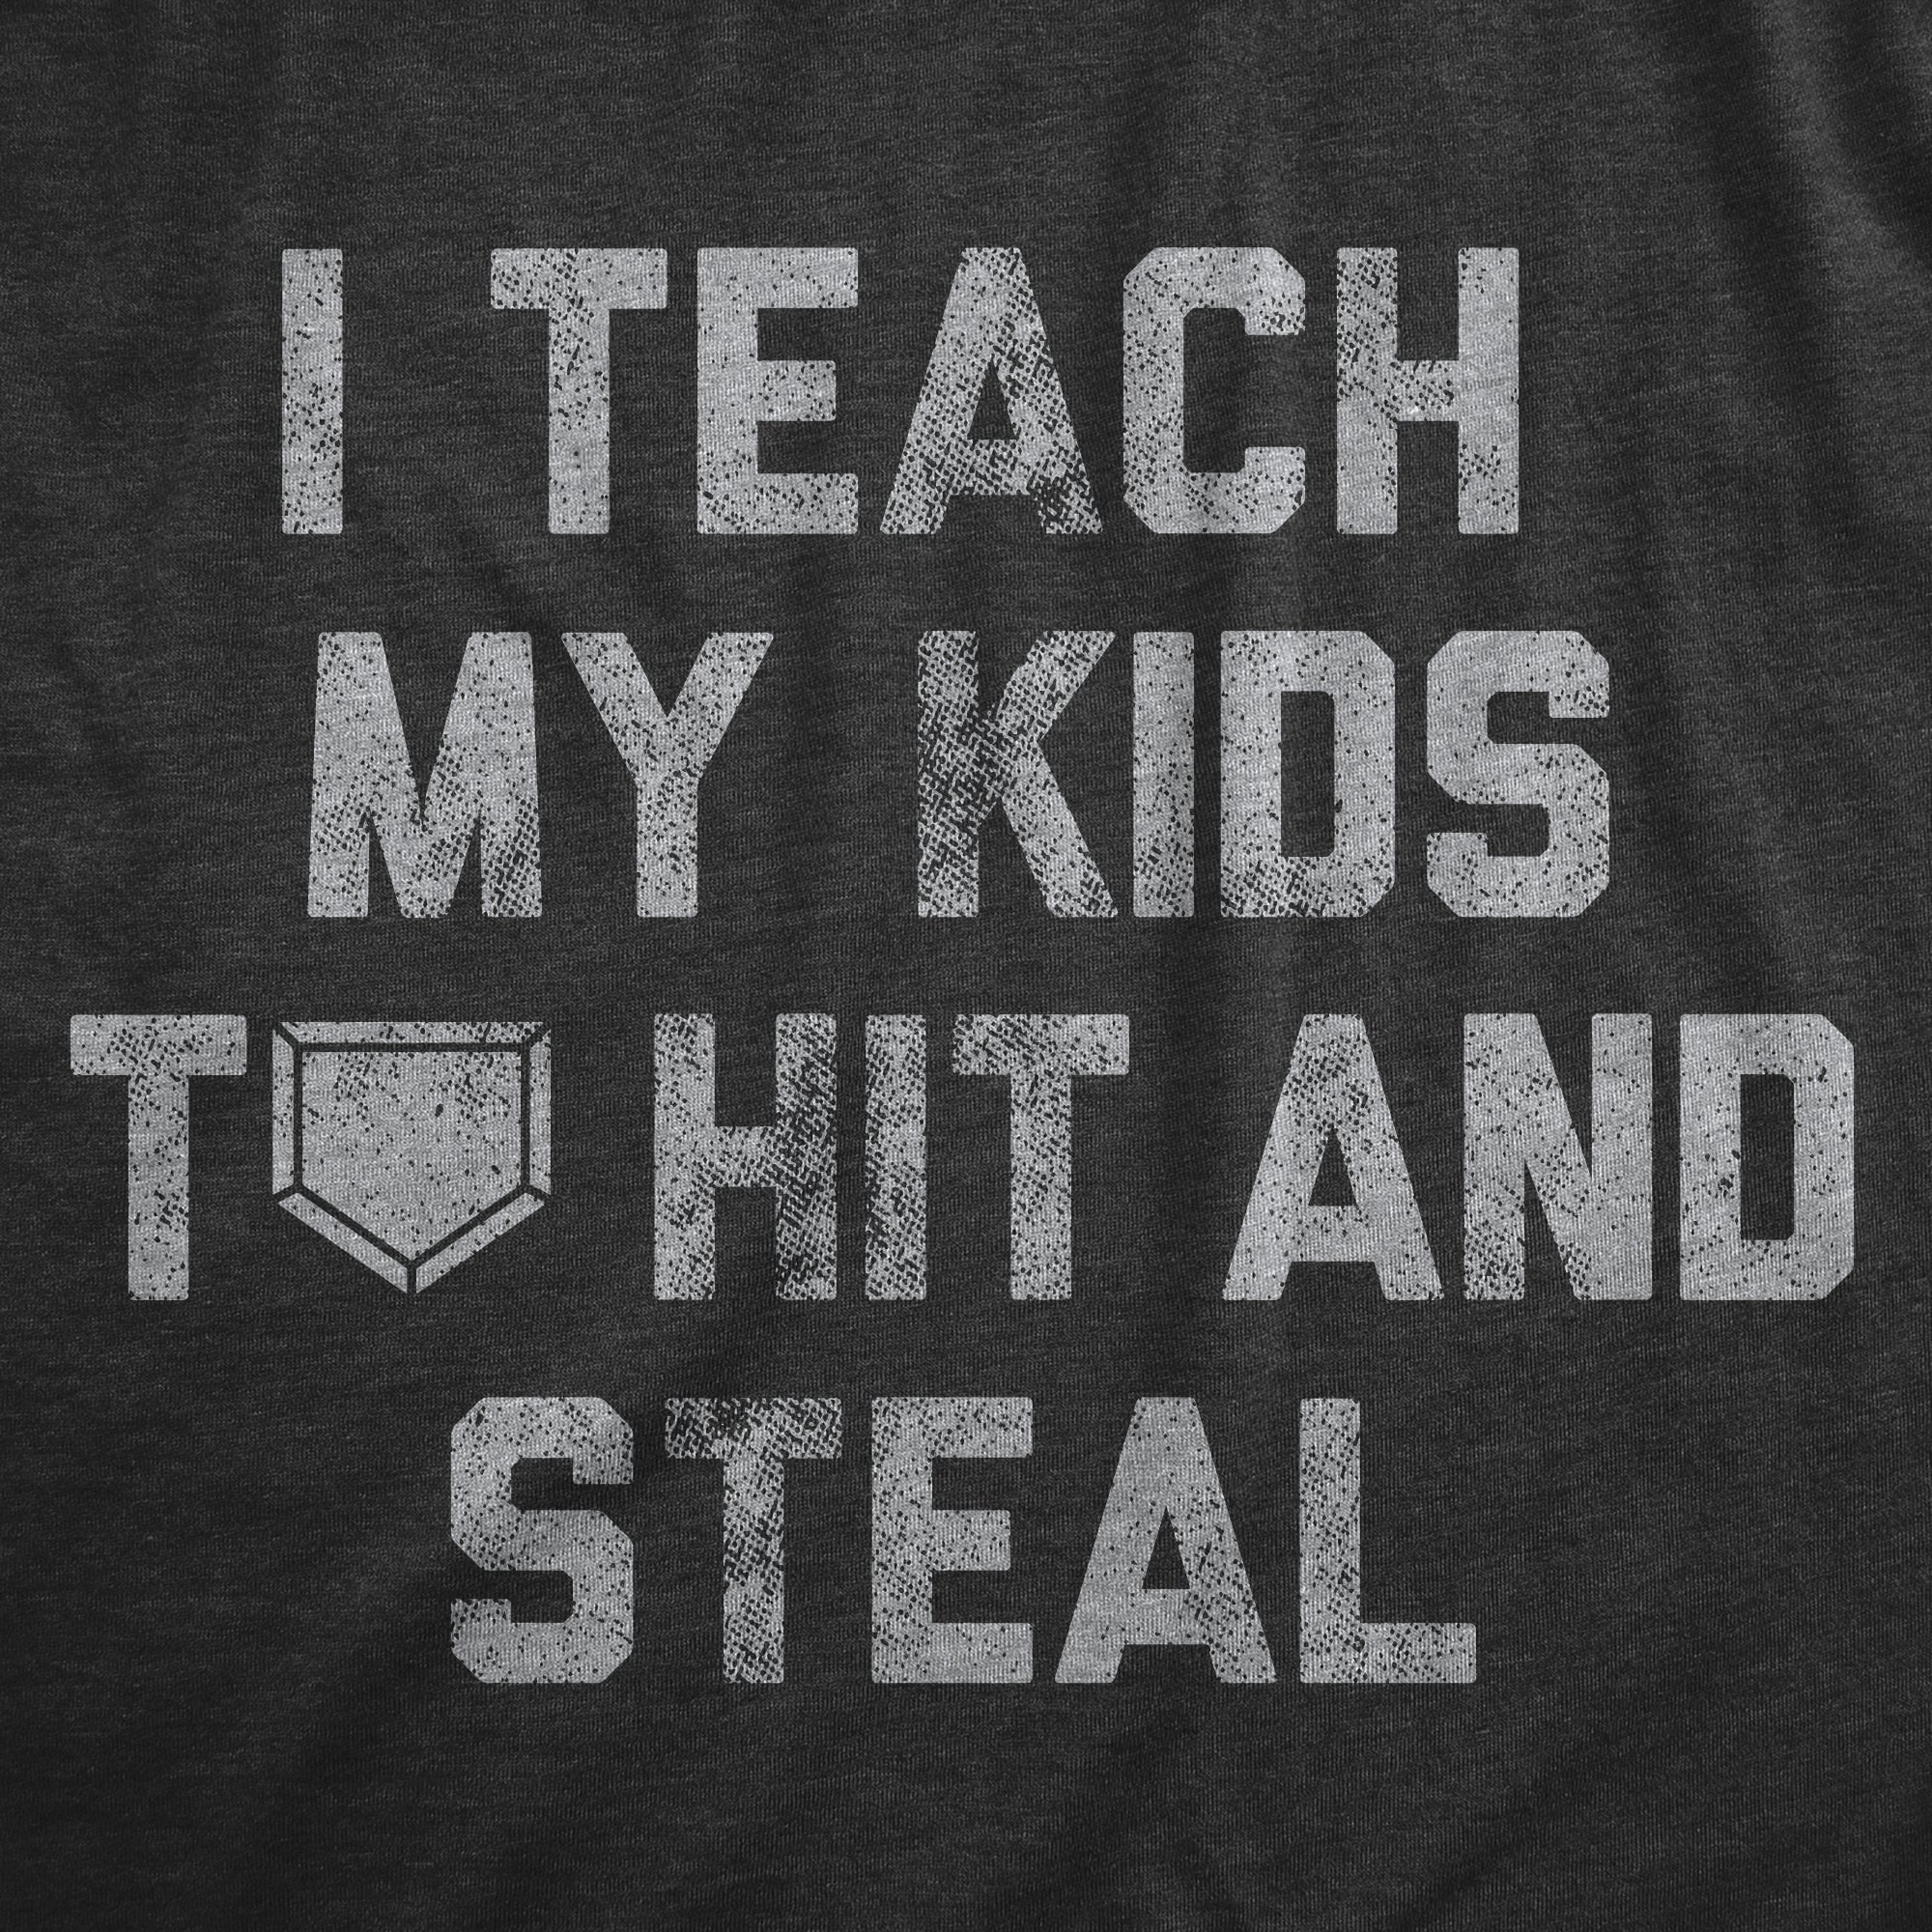 Funny Heather Black - HIT I Teach My Kids To Hit And Steal Womens T Shirt Nerdy Baseball sarcastic Tee